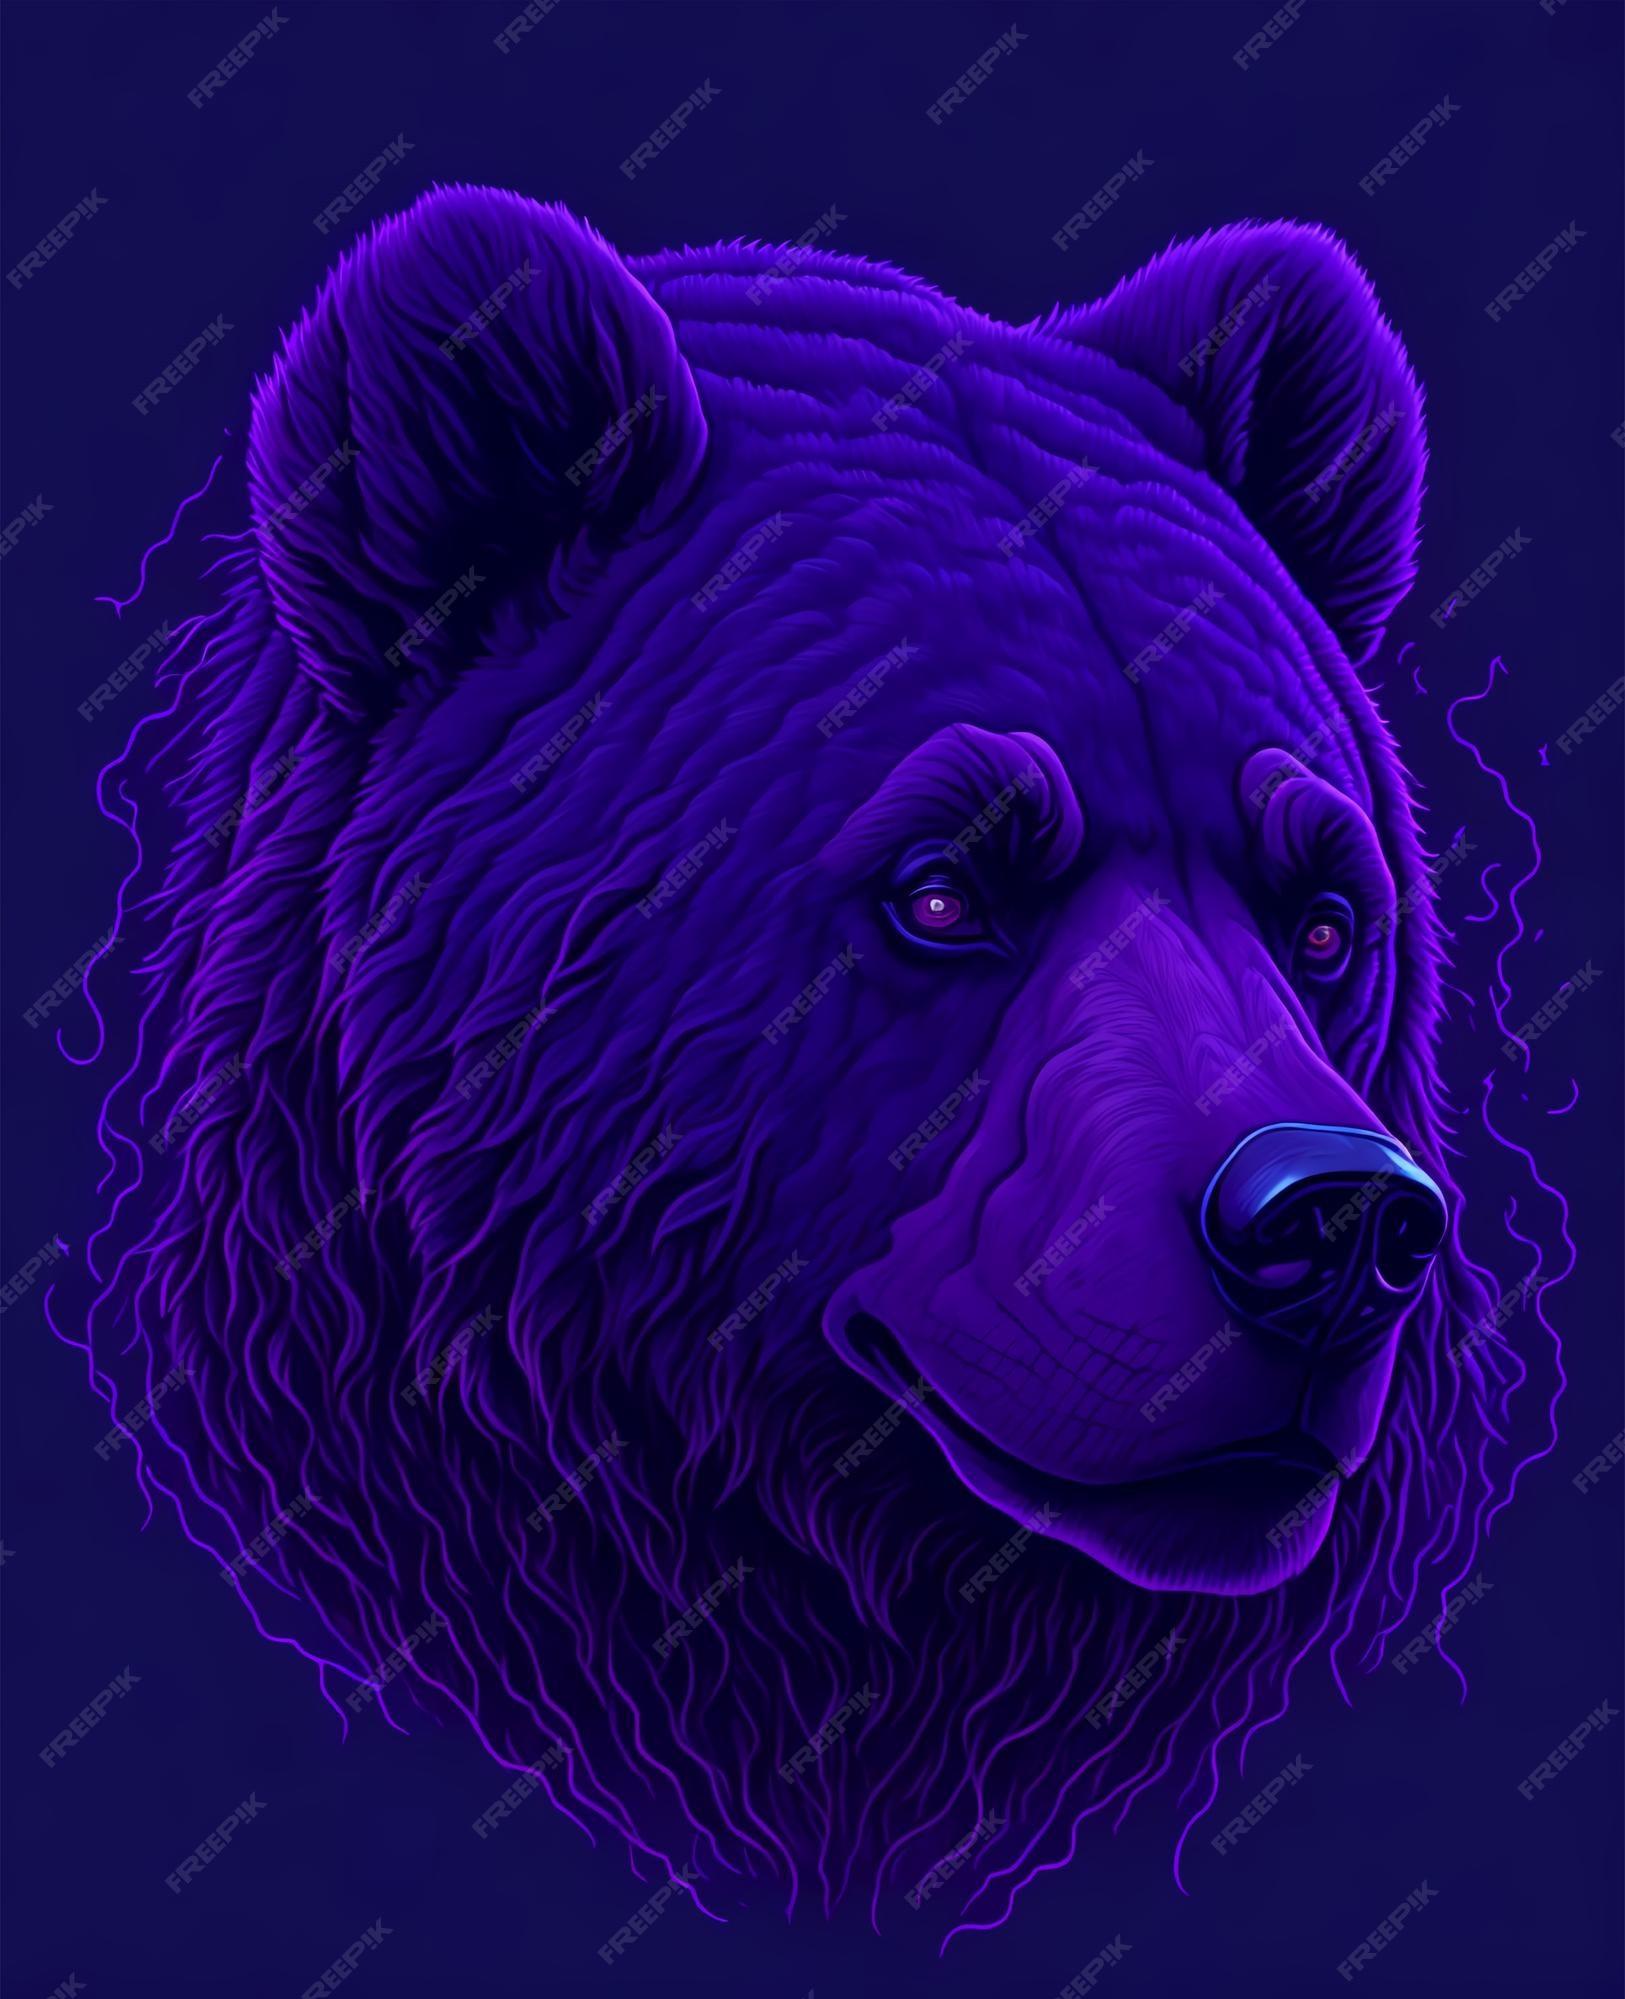 Premium Vector A Purple Bear With Black Head And